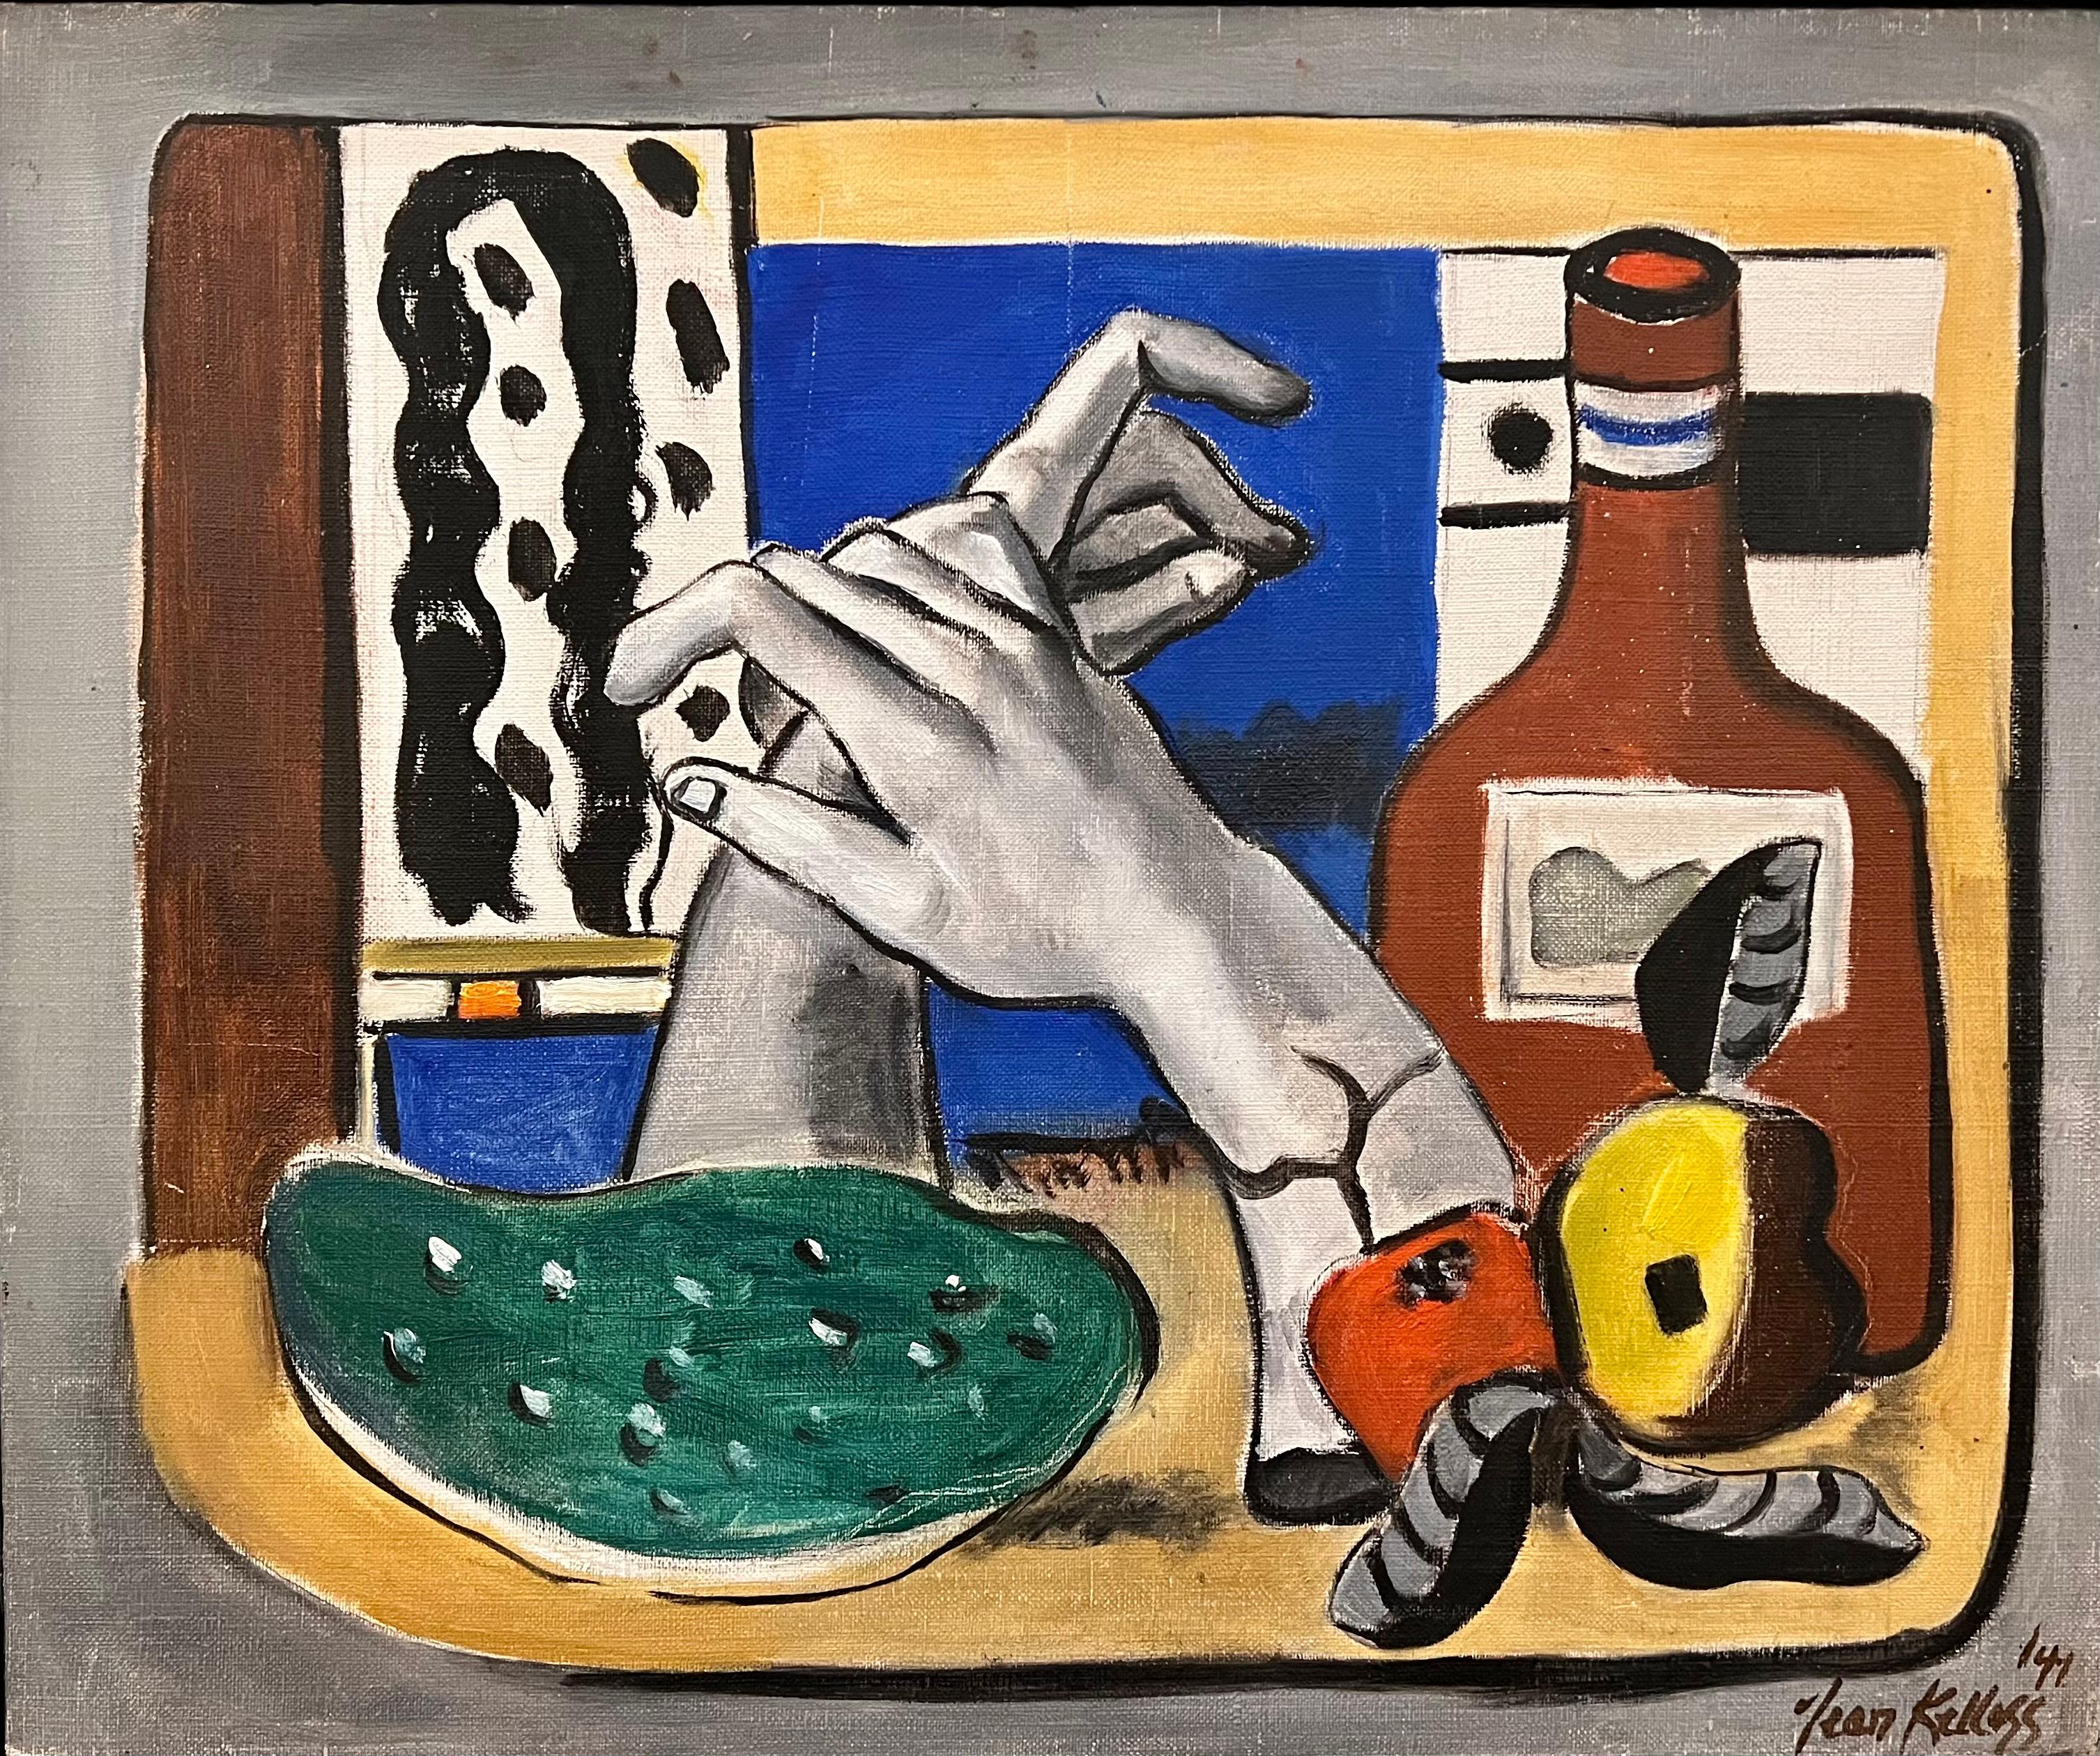 Homage to Leger